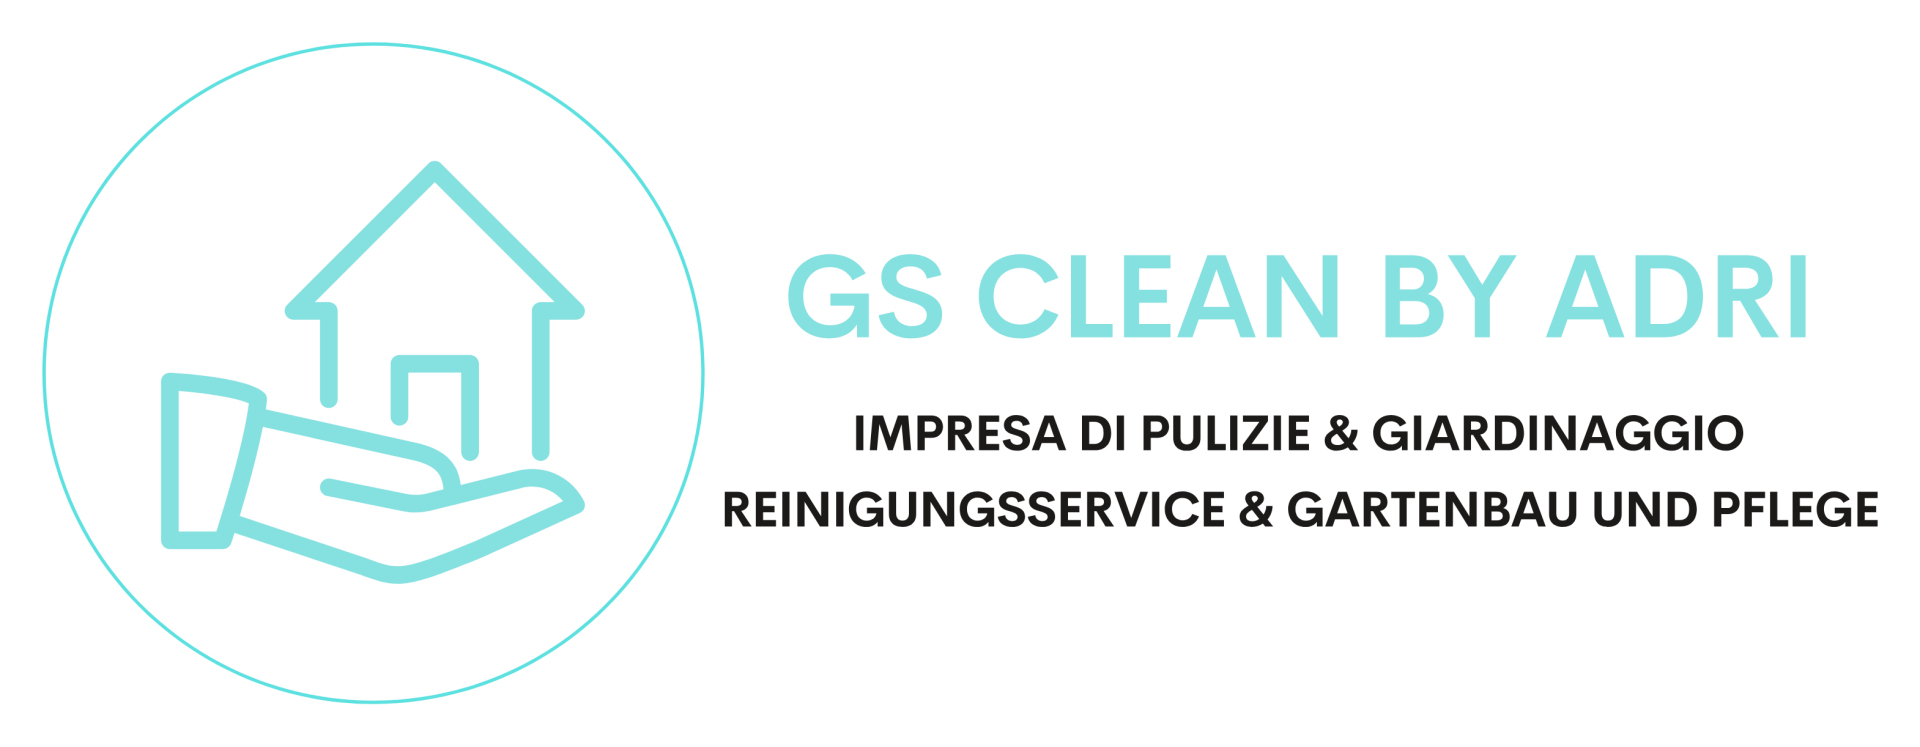 logo-gs-clean-by-adry-footer